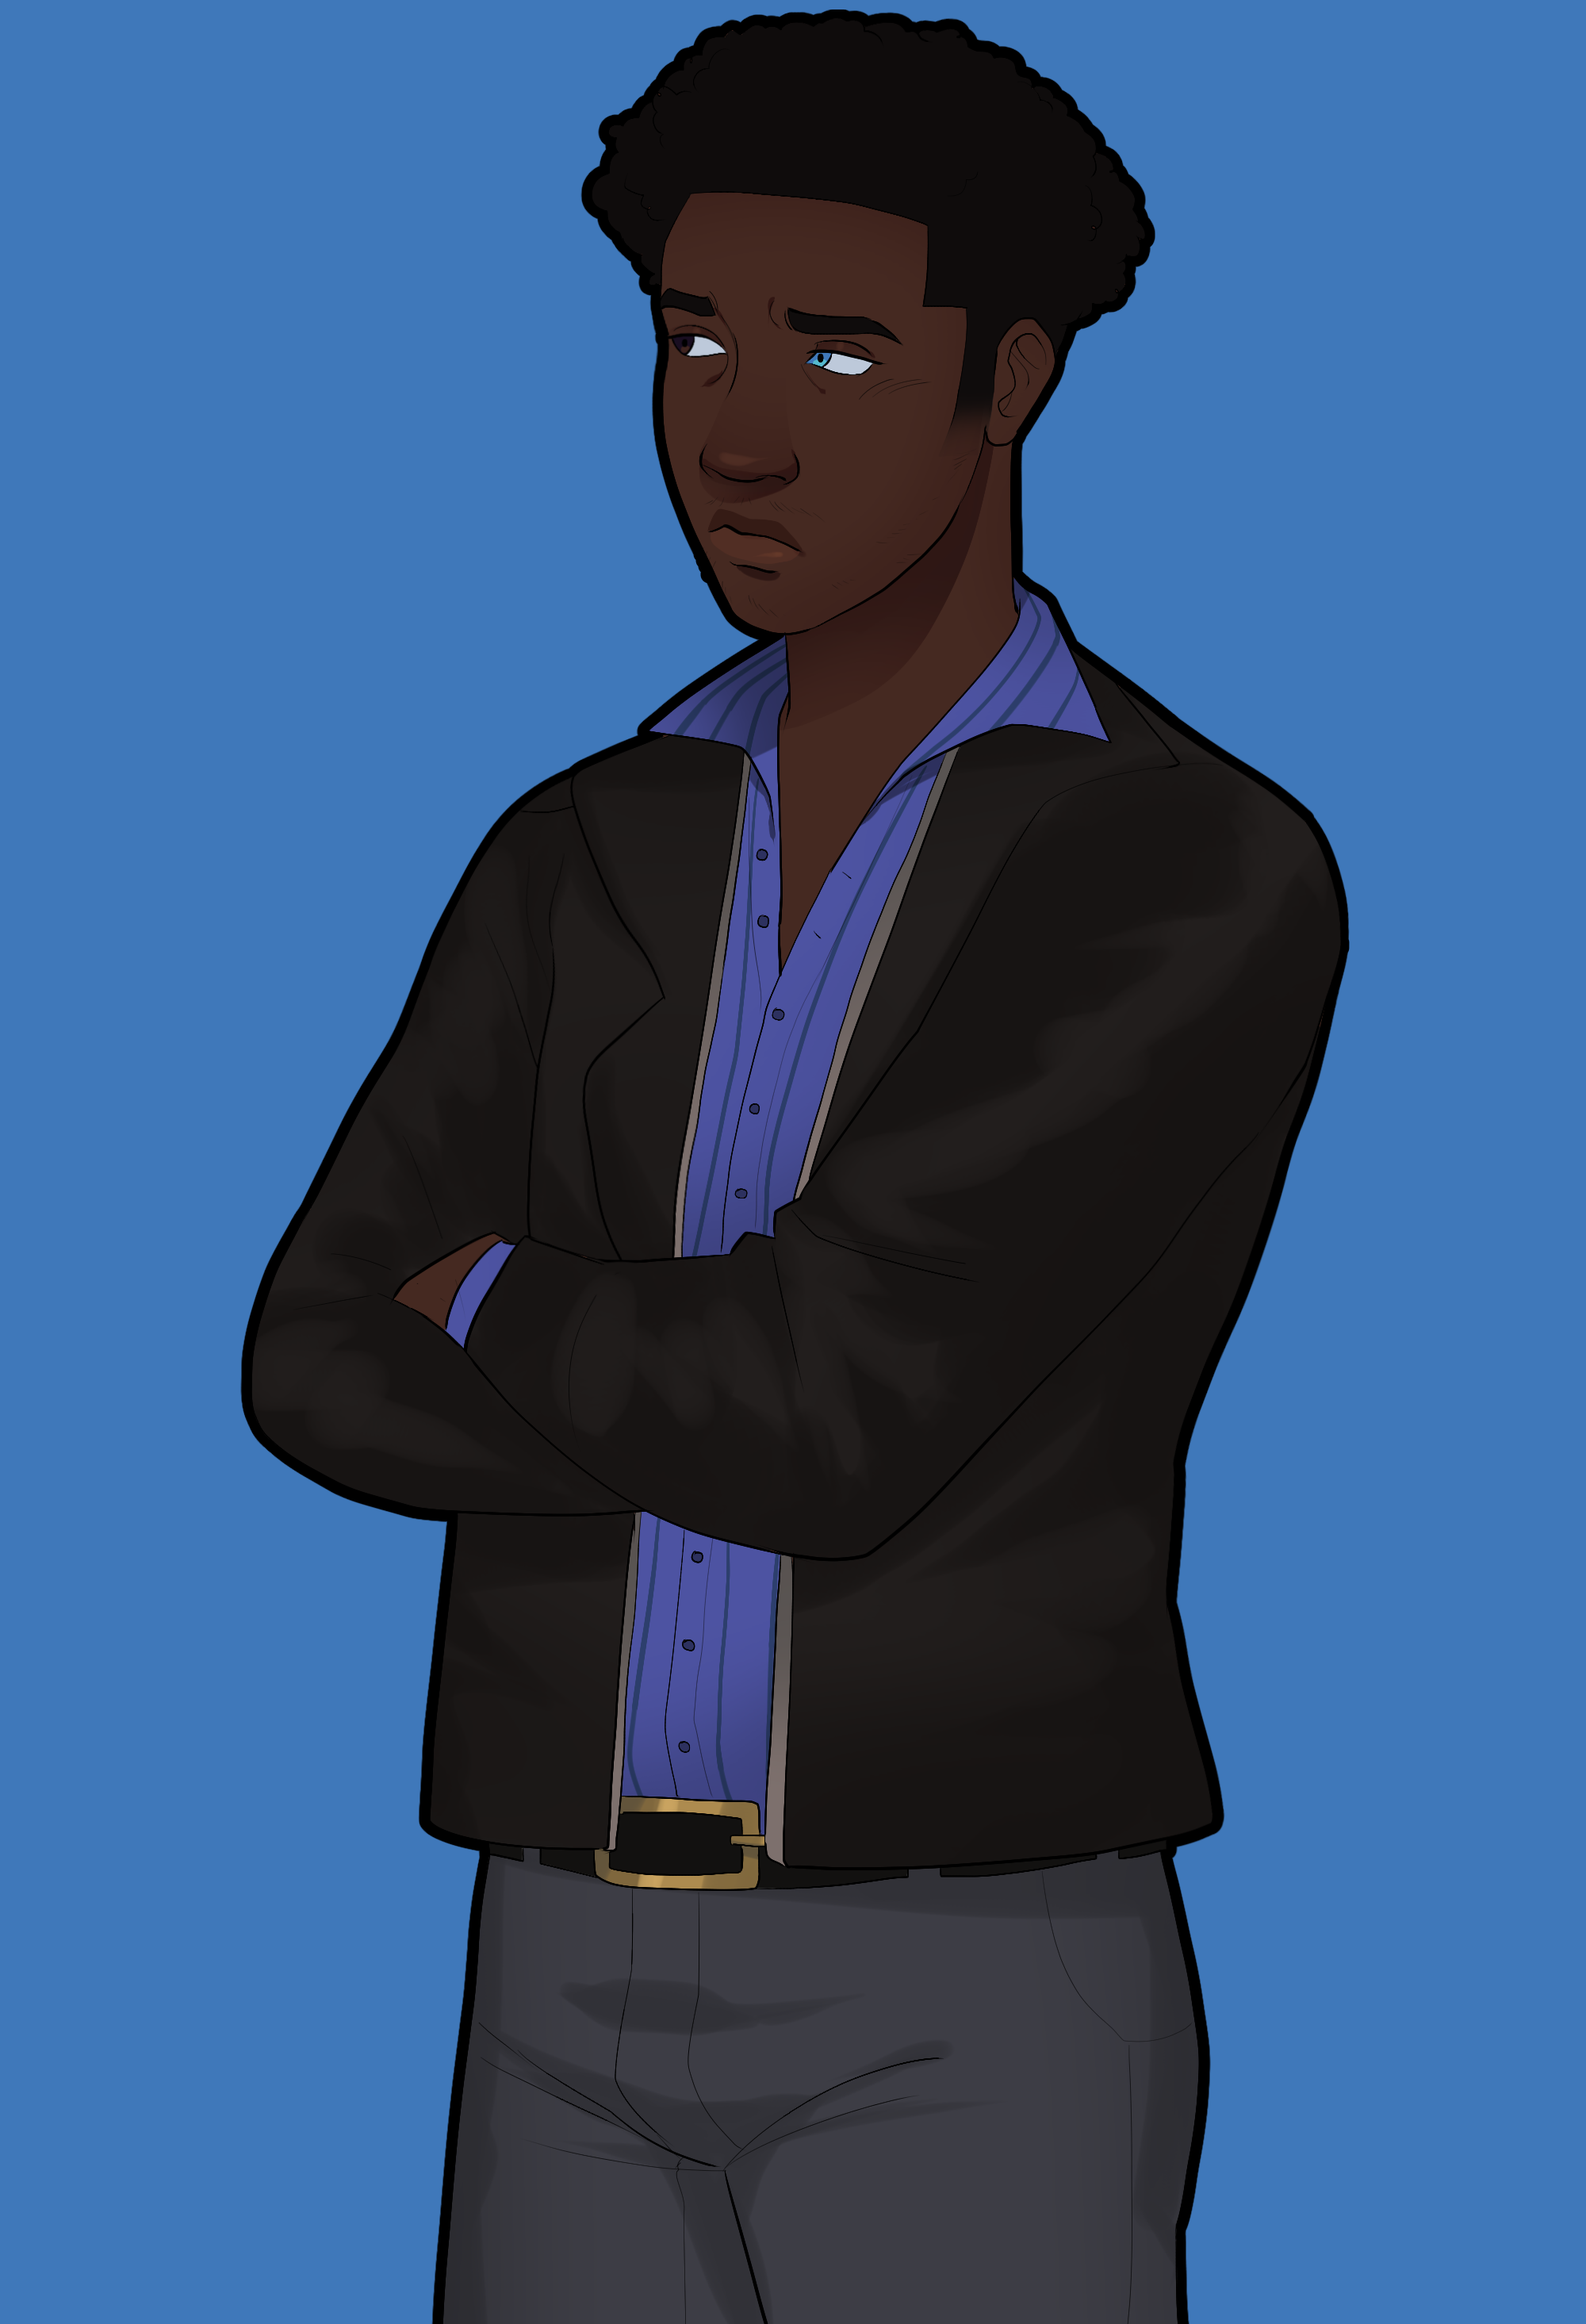 An illustration of a dark skinned, masculine presenting character with heterochromia, making one of his eyes brown and the other a pale blue. He is wearing a striped, blue button down shirt underneath a black leather jacket, along with pale blue jeans. He is crossing his arms and quirking his head to the side critically as he faces to the left.